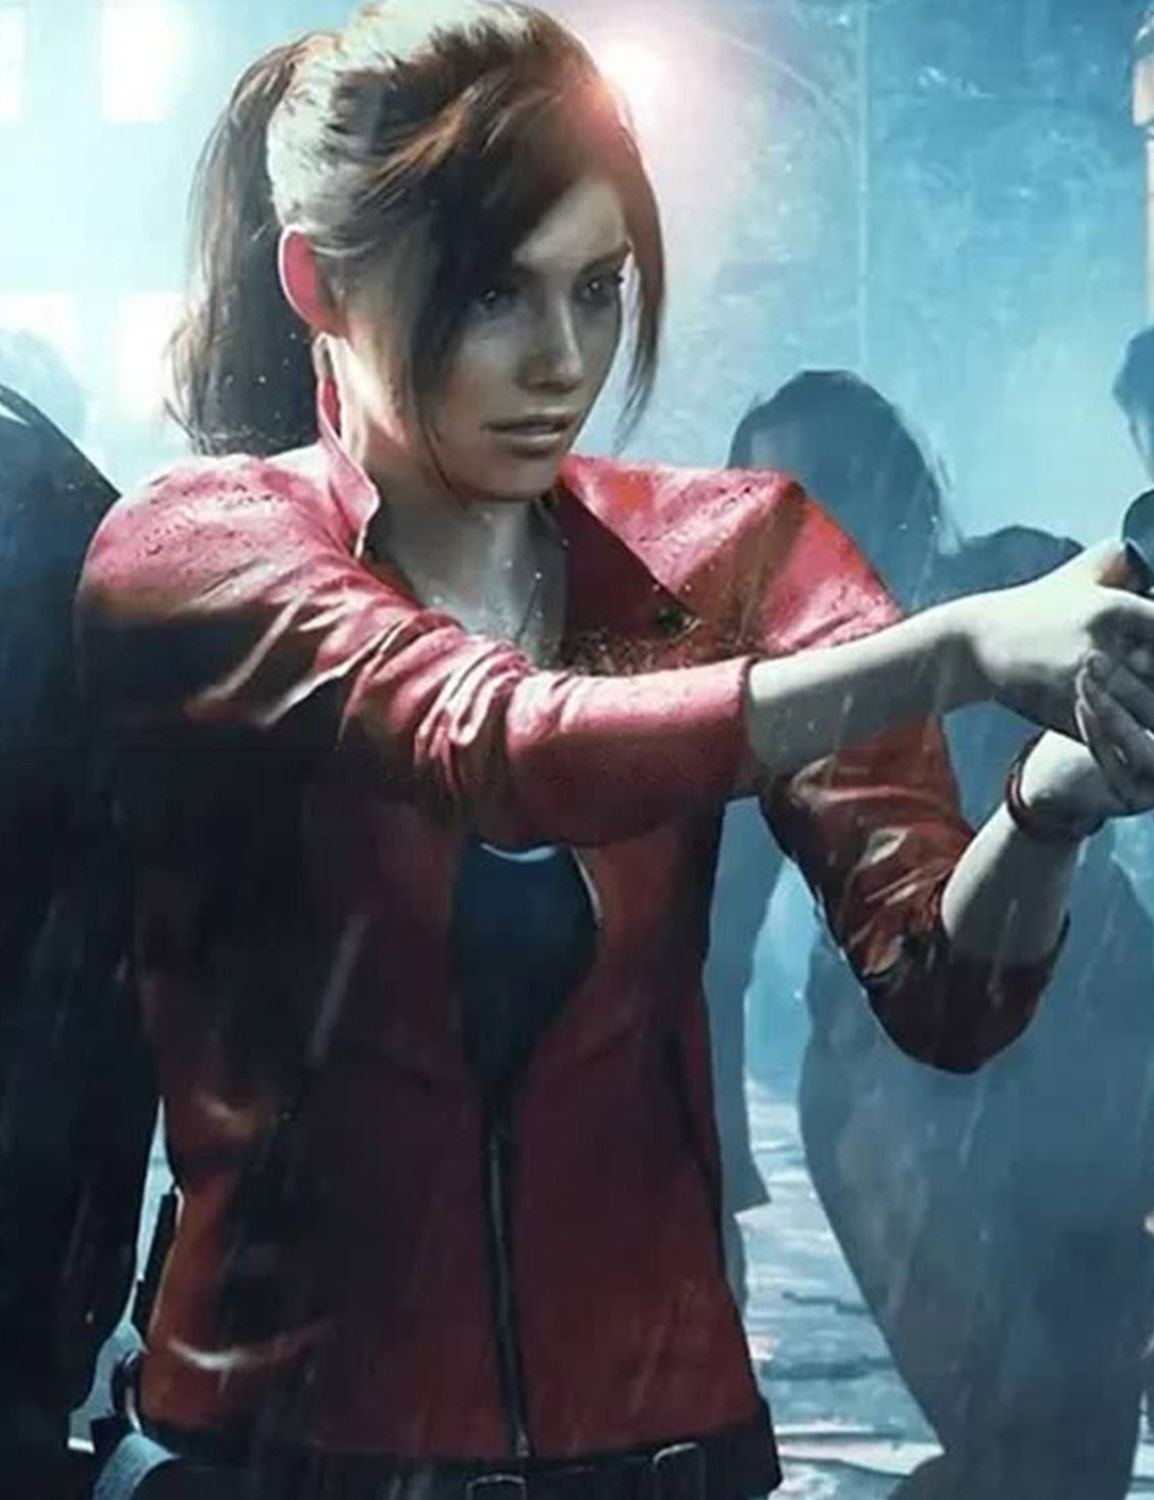 Claire Redfield Resident Evil Leather Jacket - Jacket Hub